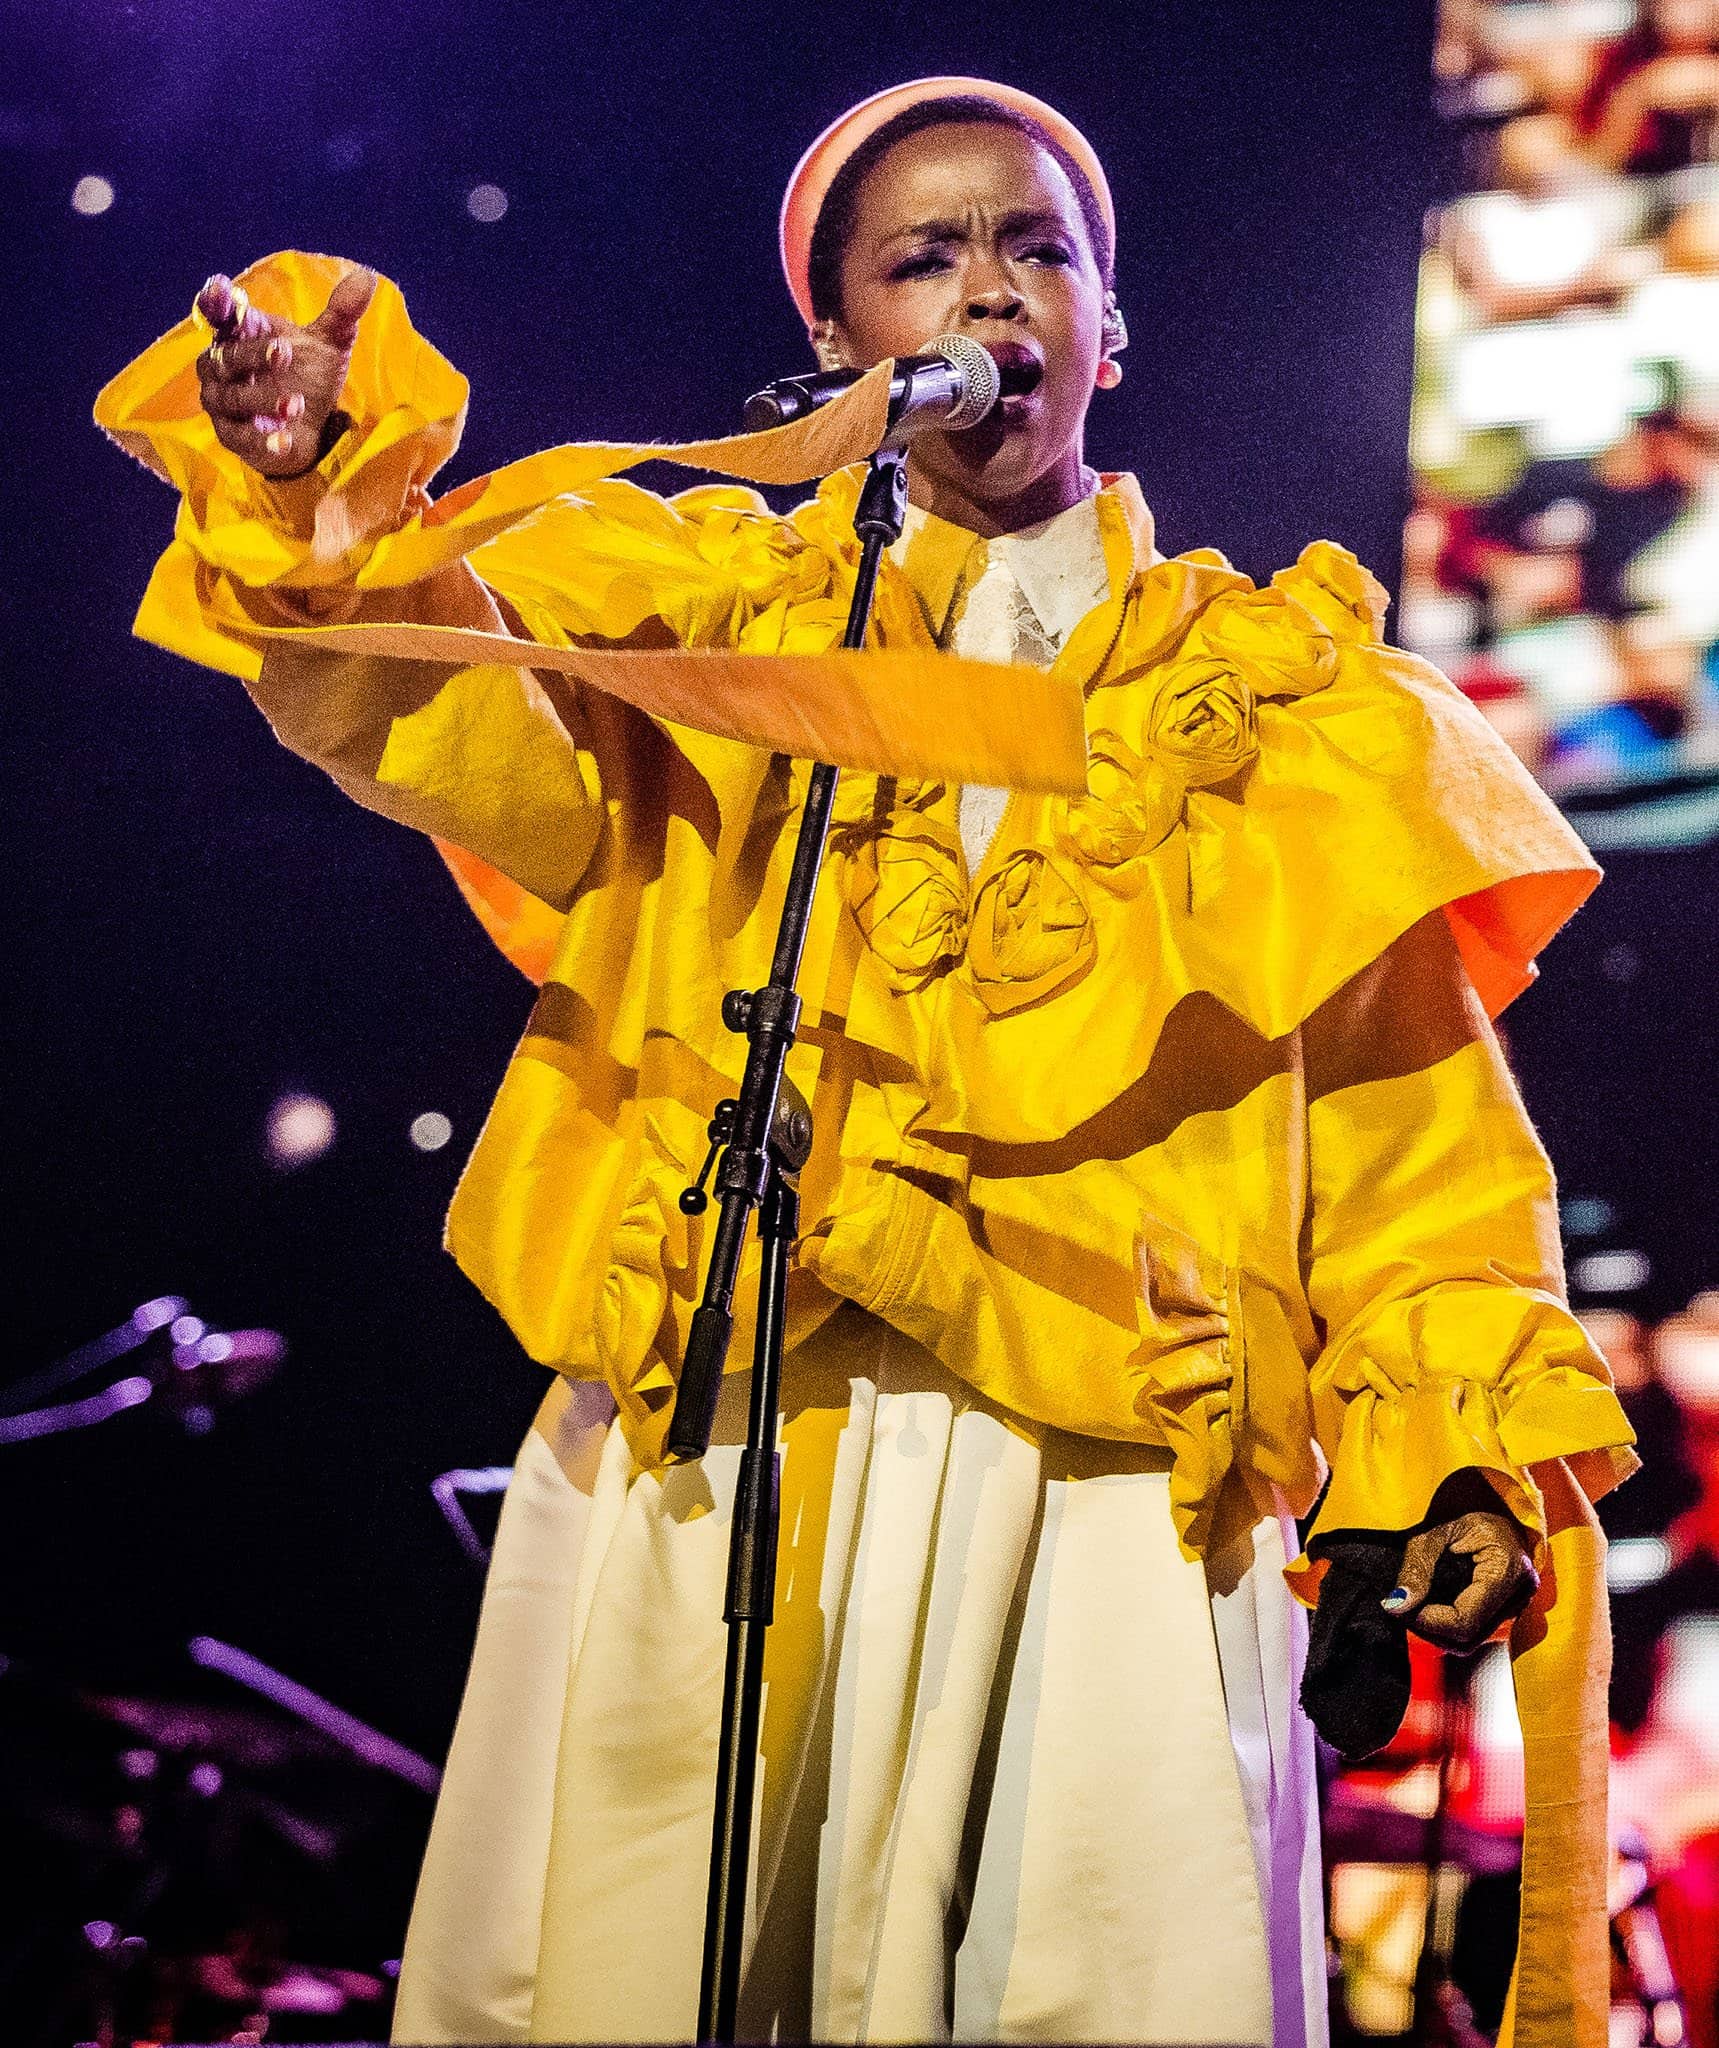 Lauryn Hill, emerging from a musically oriented upbringing, gained fame as a member of the Grammy-winning Fugees in the 1990s and currently possesses a net worth of approximately $9 million